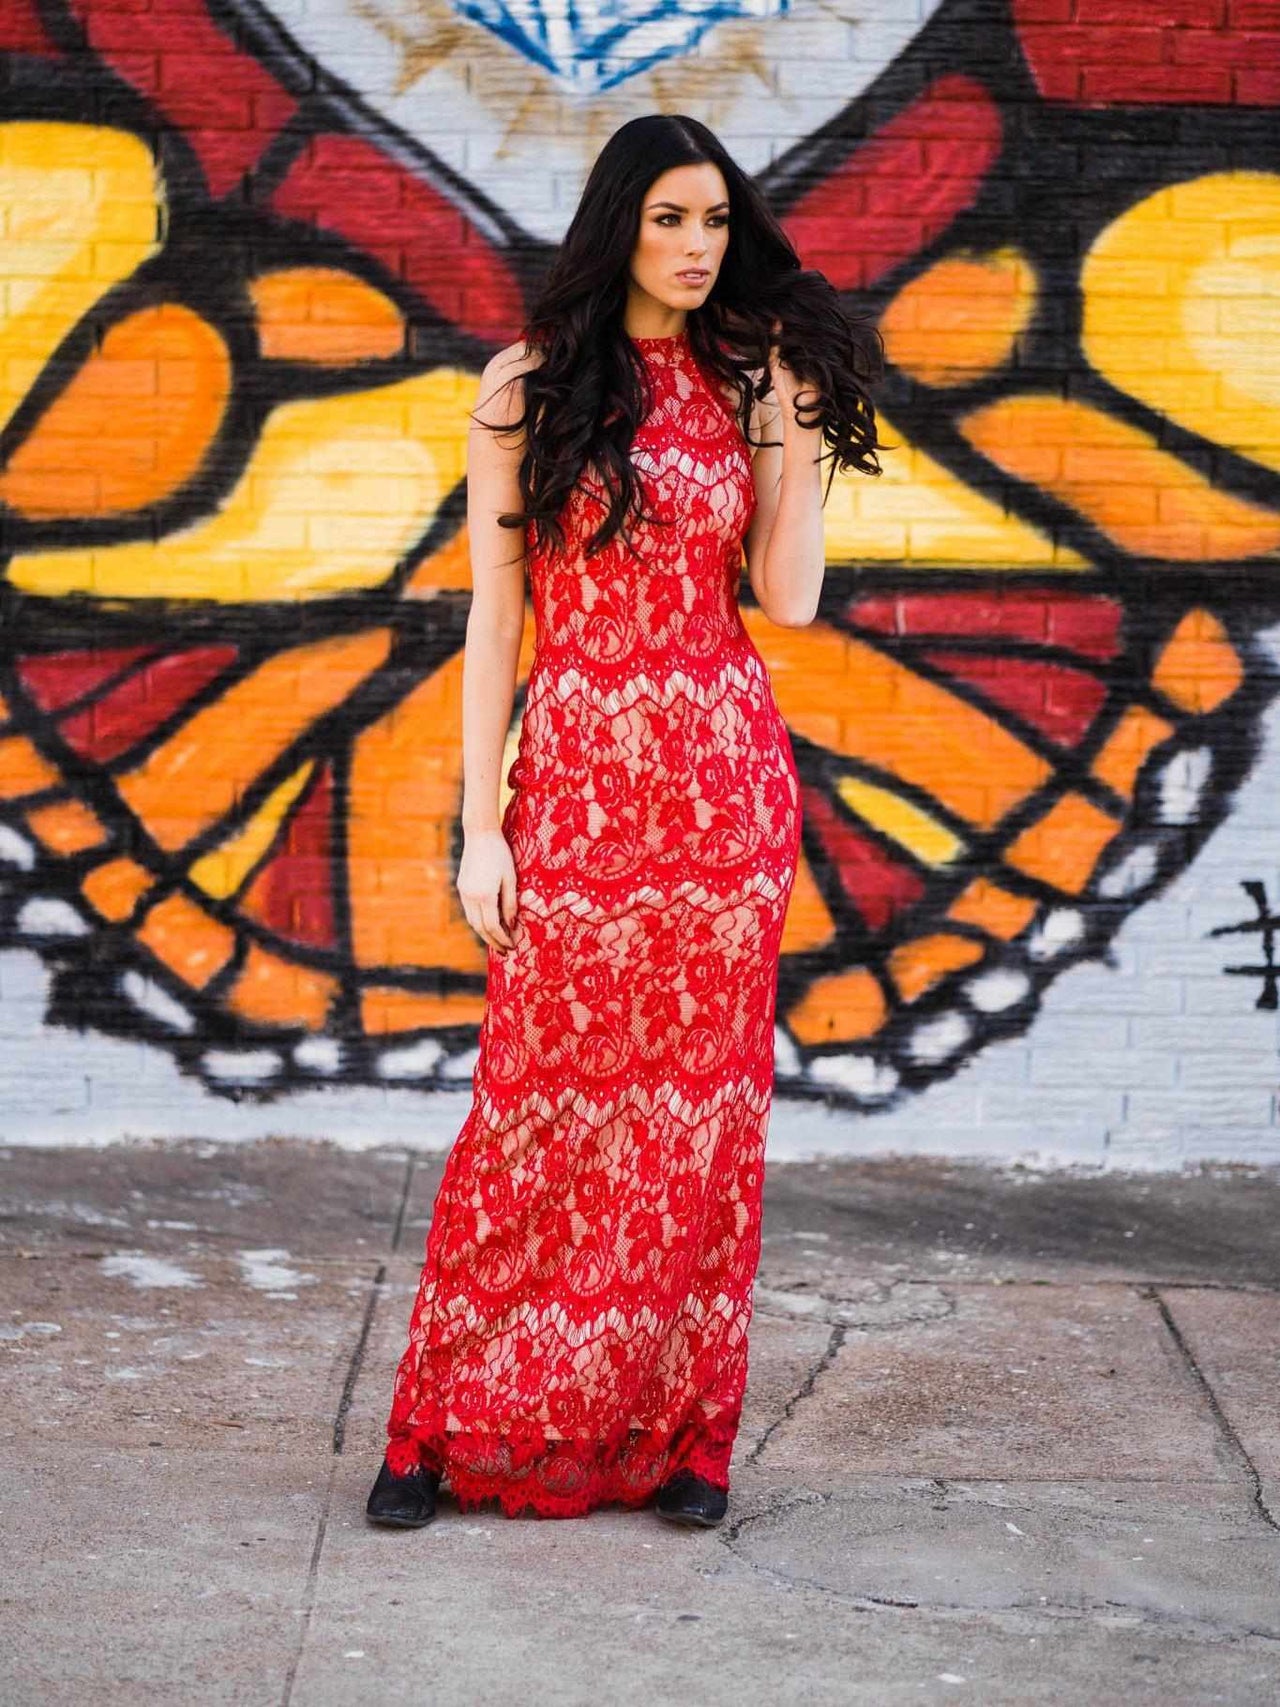 Red Hot Lace Dress - Red-Dresses-Southern Fried Chics